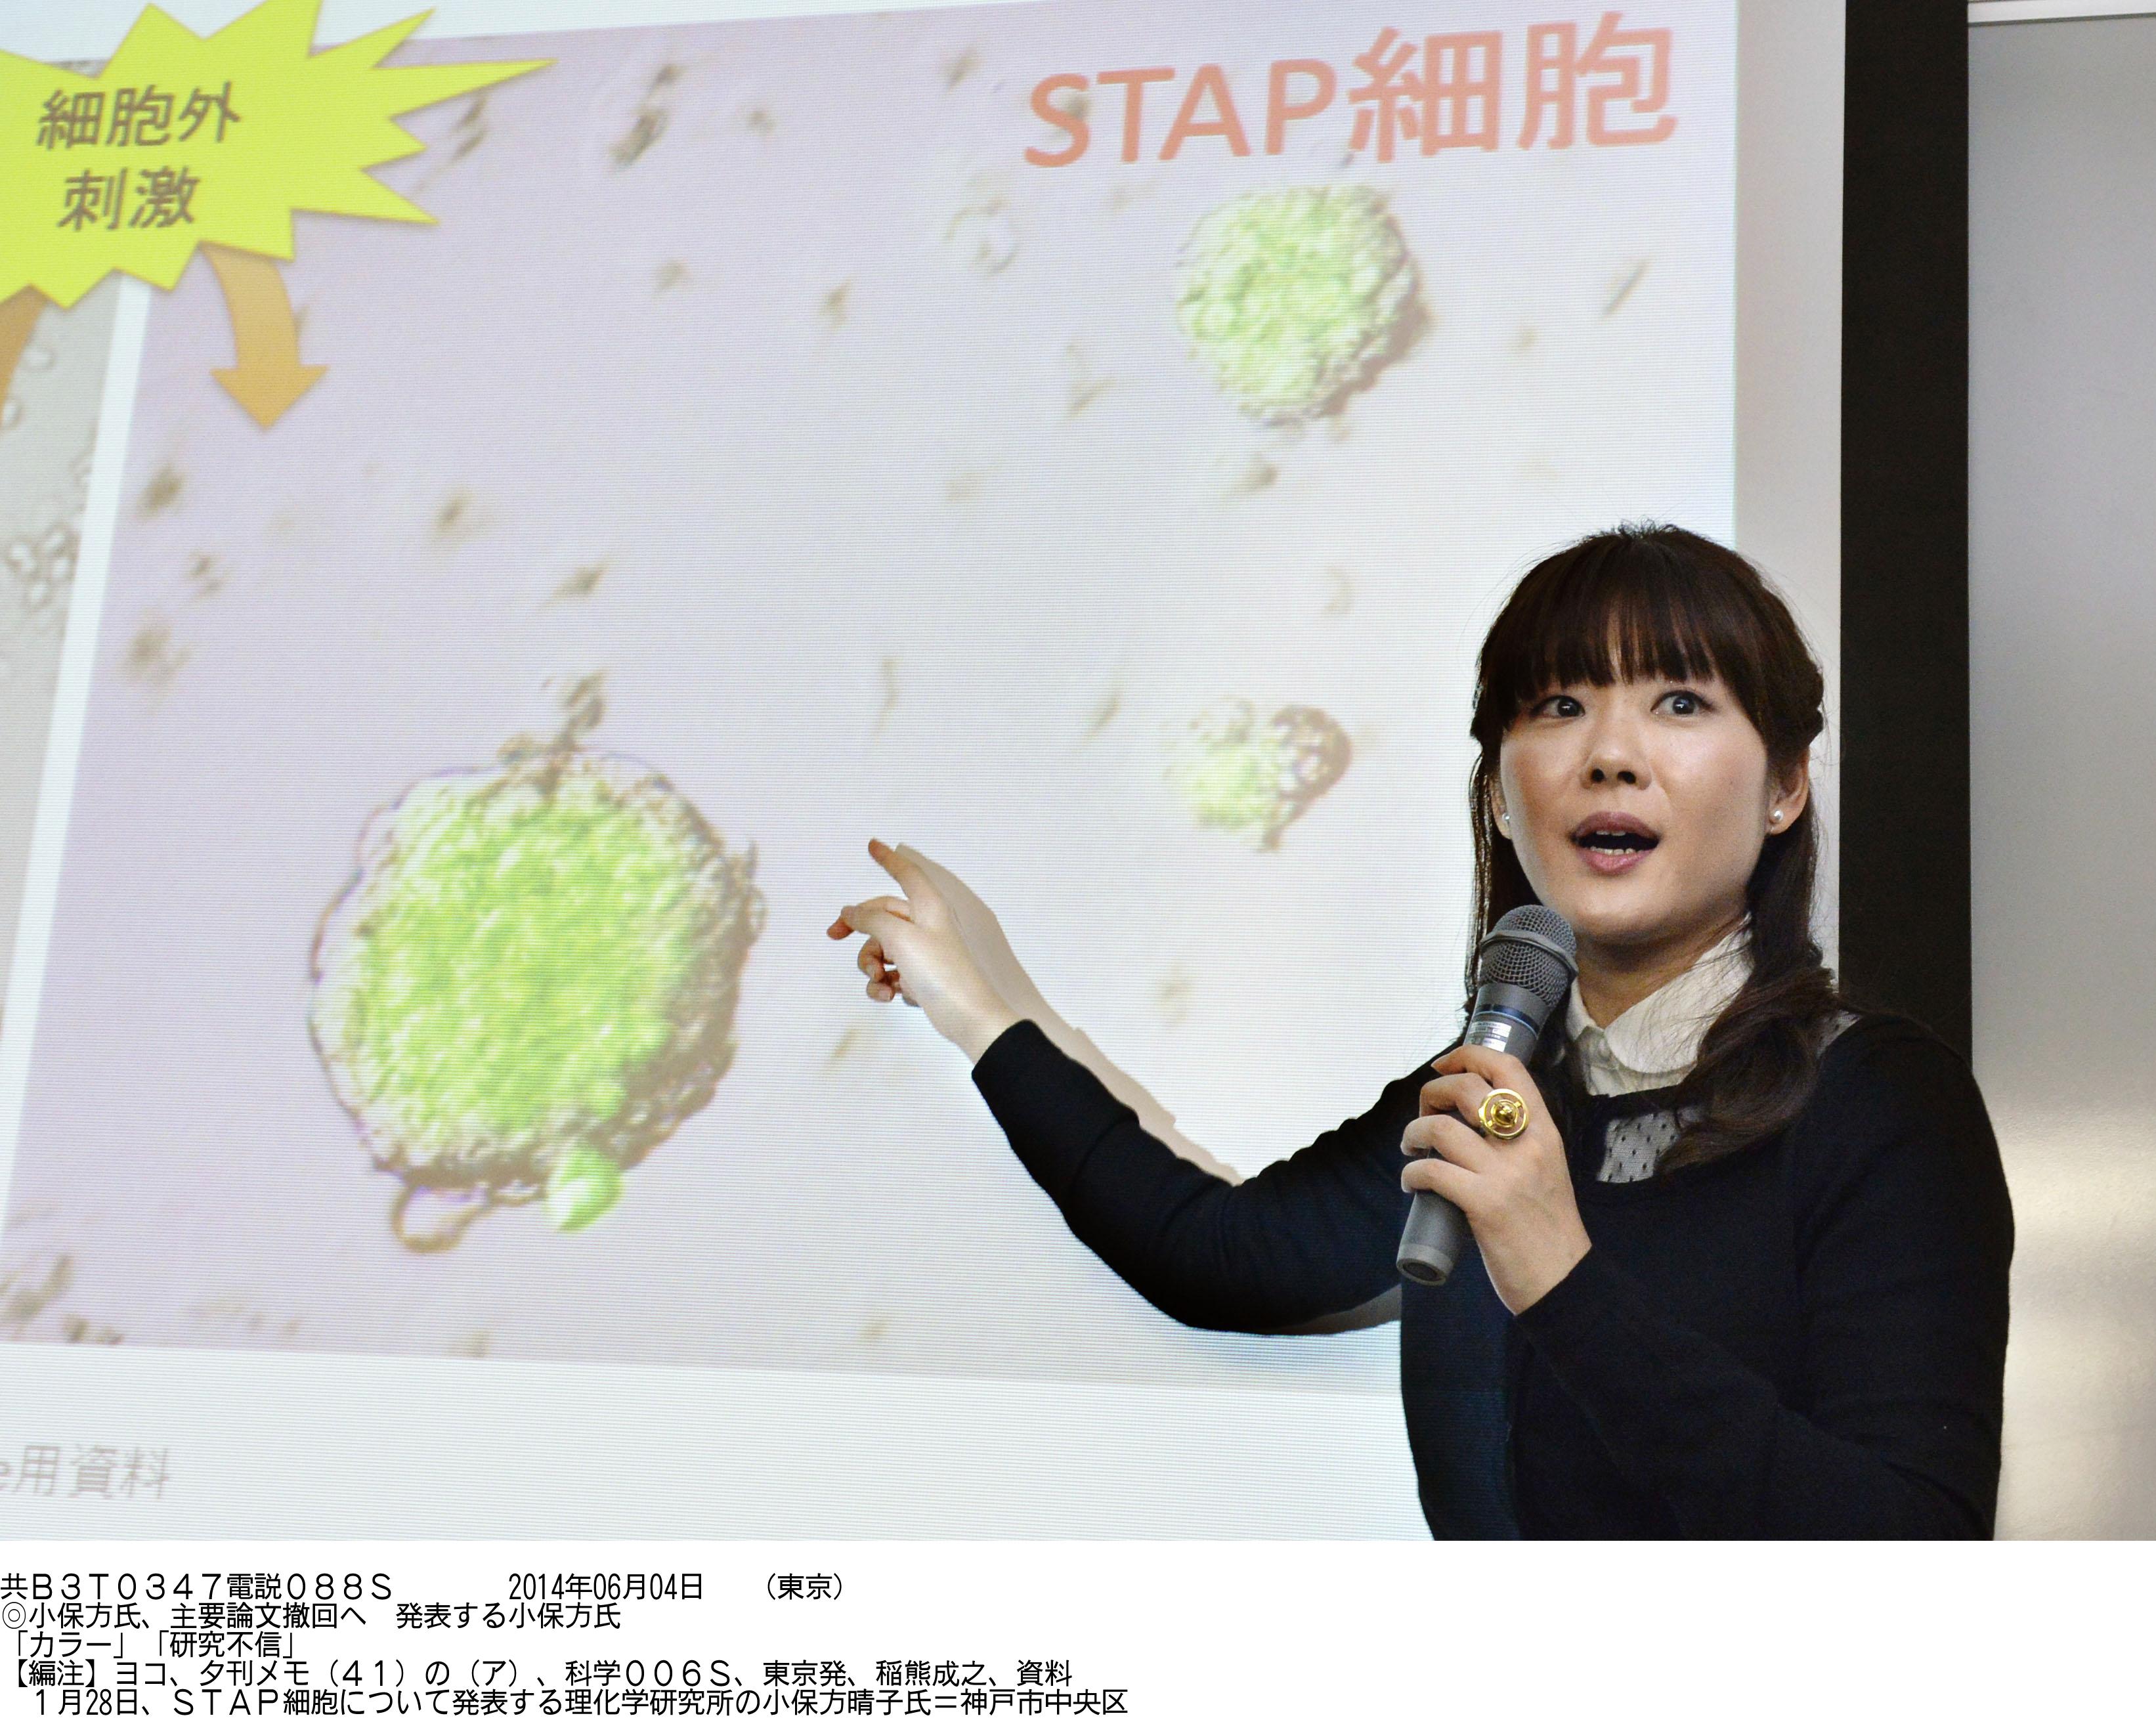 Haruko Obakata speaks about her research during a news conference on so-called STAP cells in Kobe, in January. | KYODO